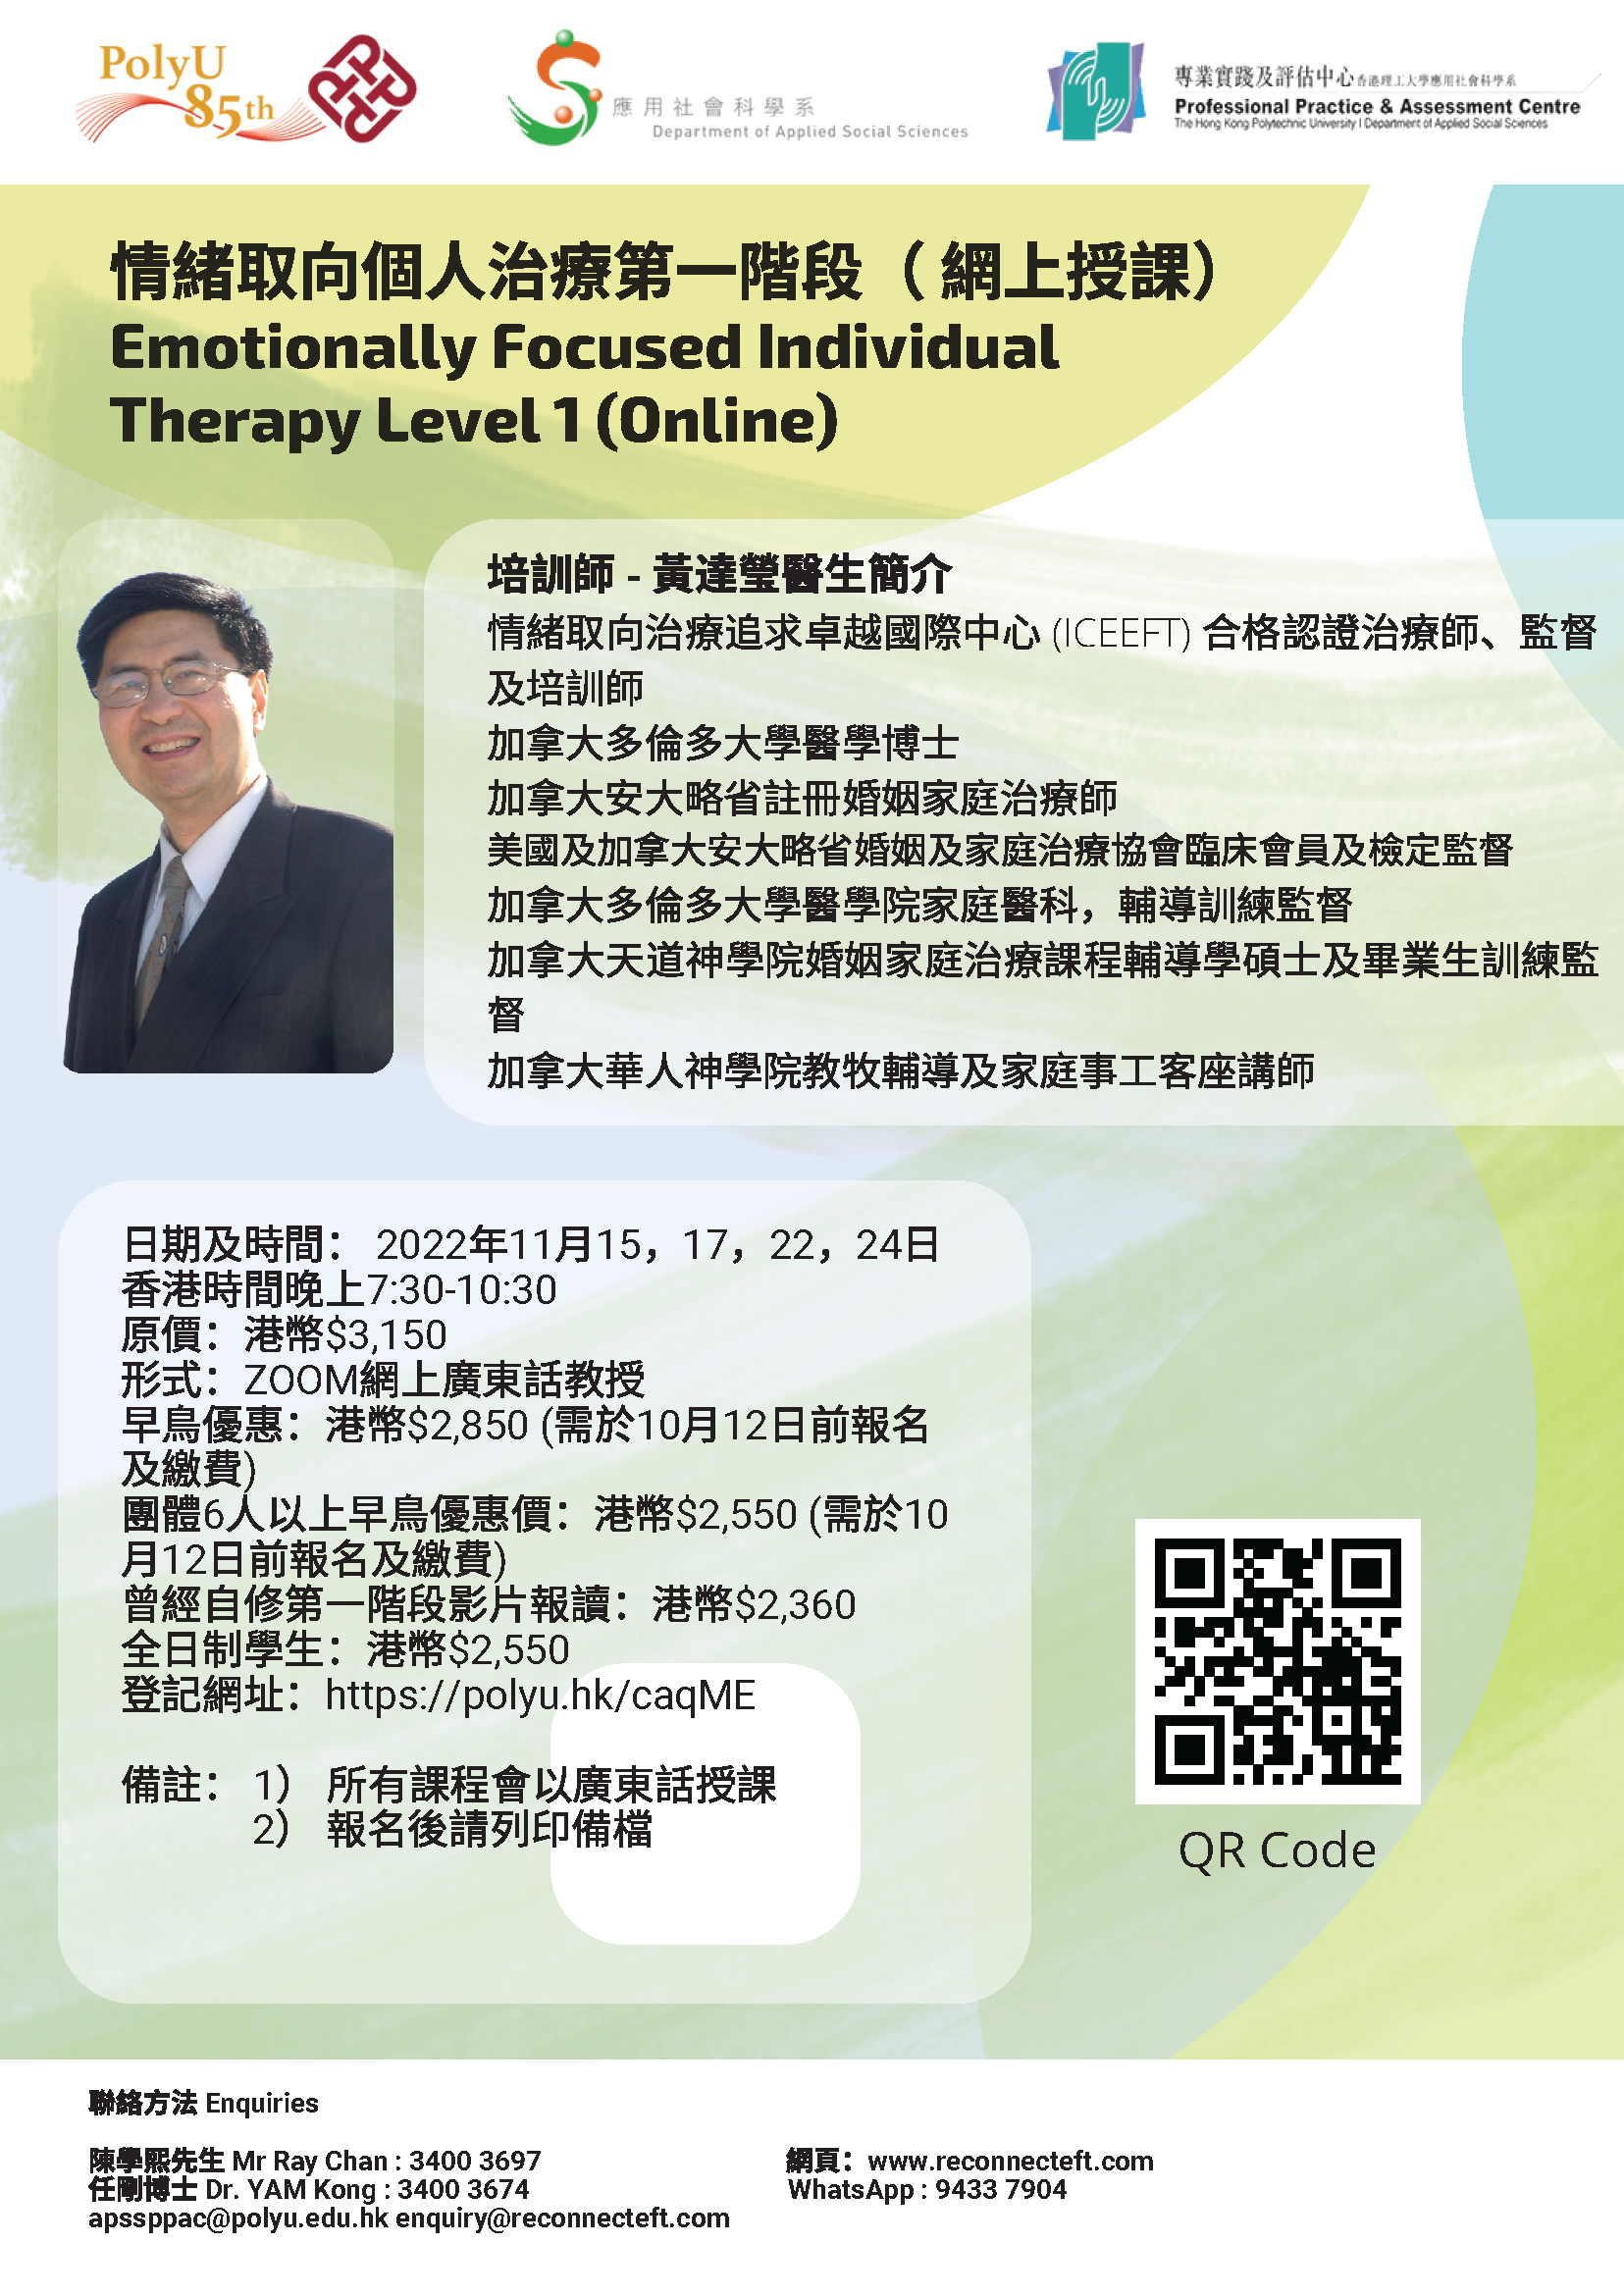 Emotionally Focused Individual Therapy Level 1 Online Poster